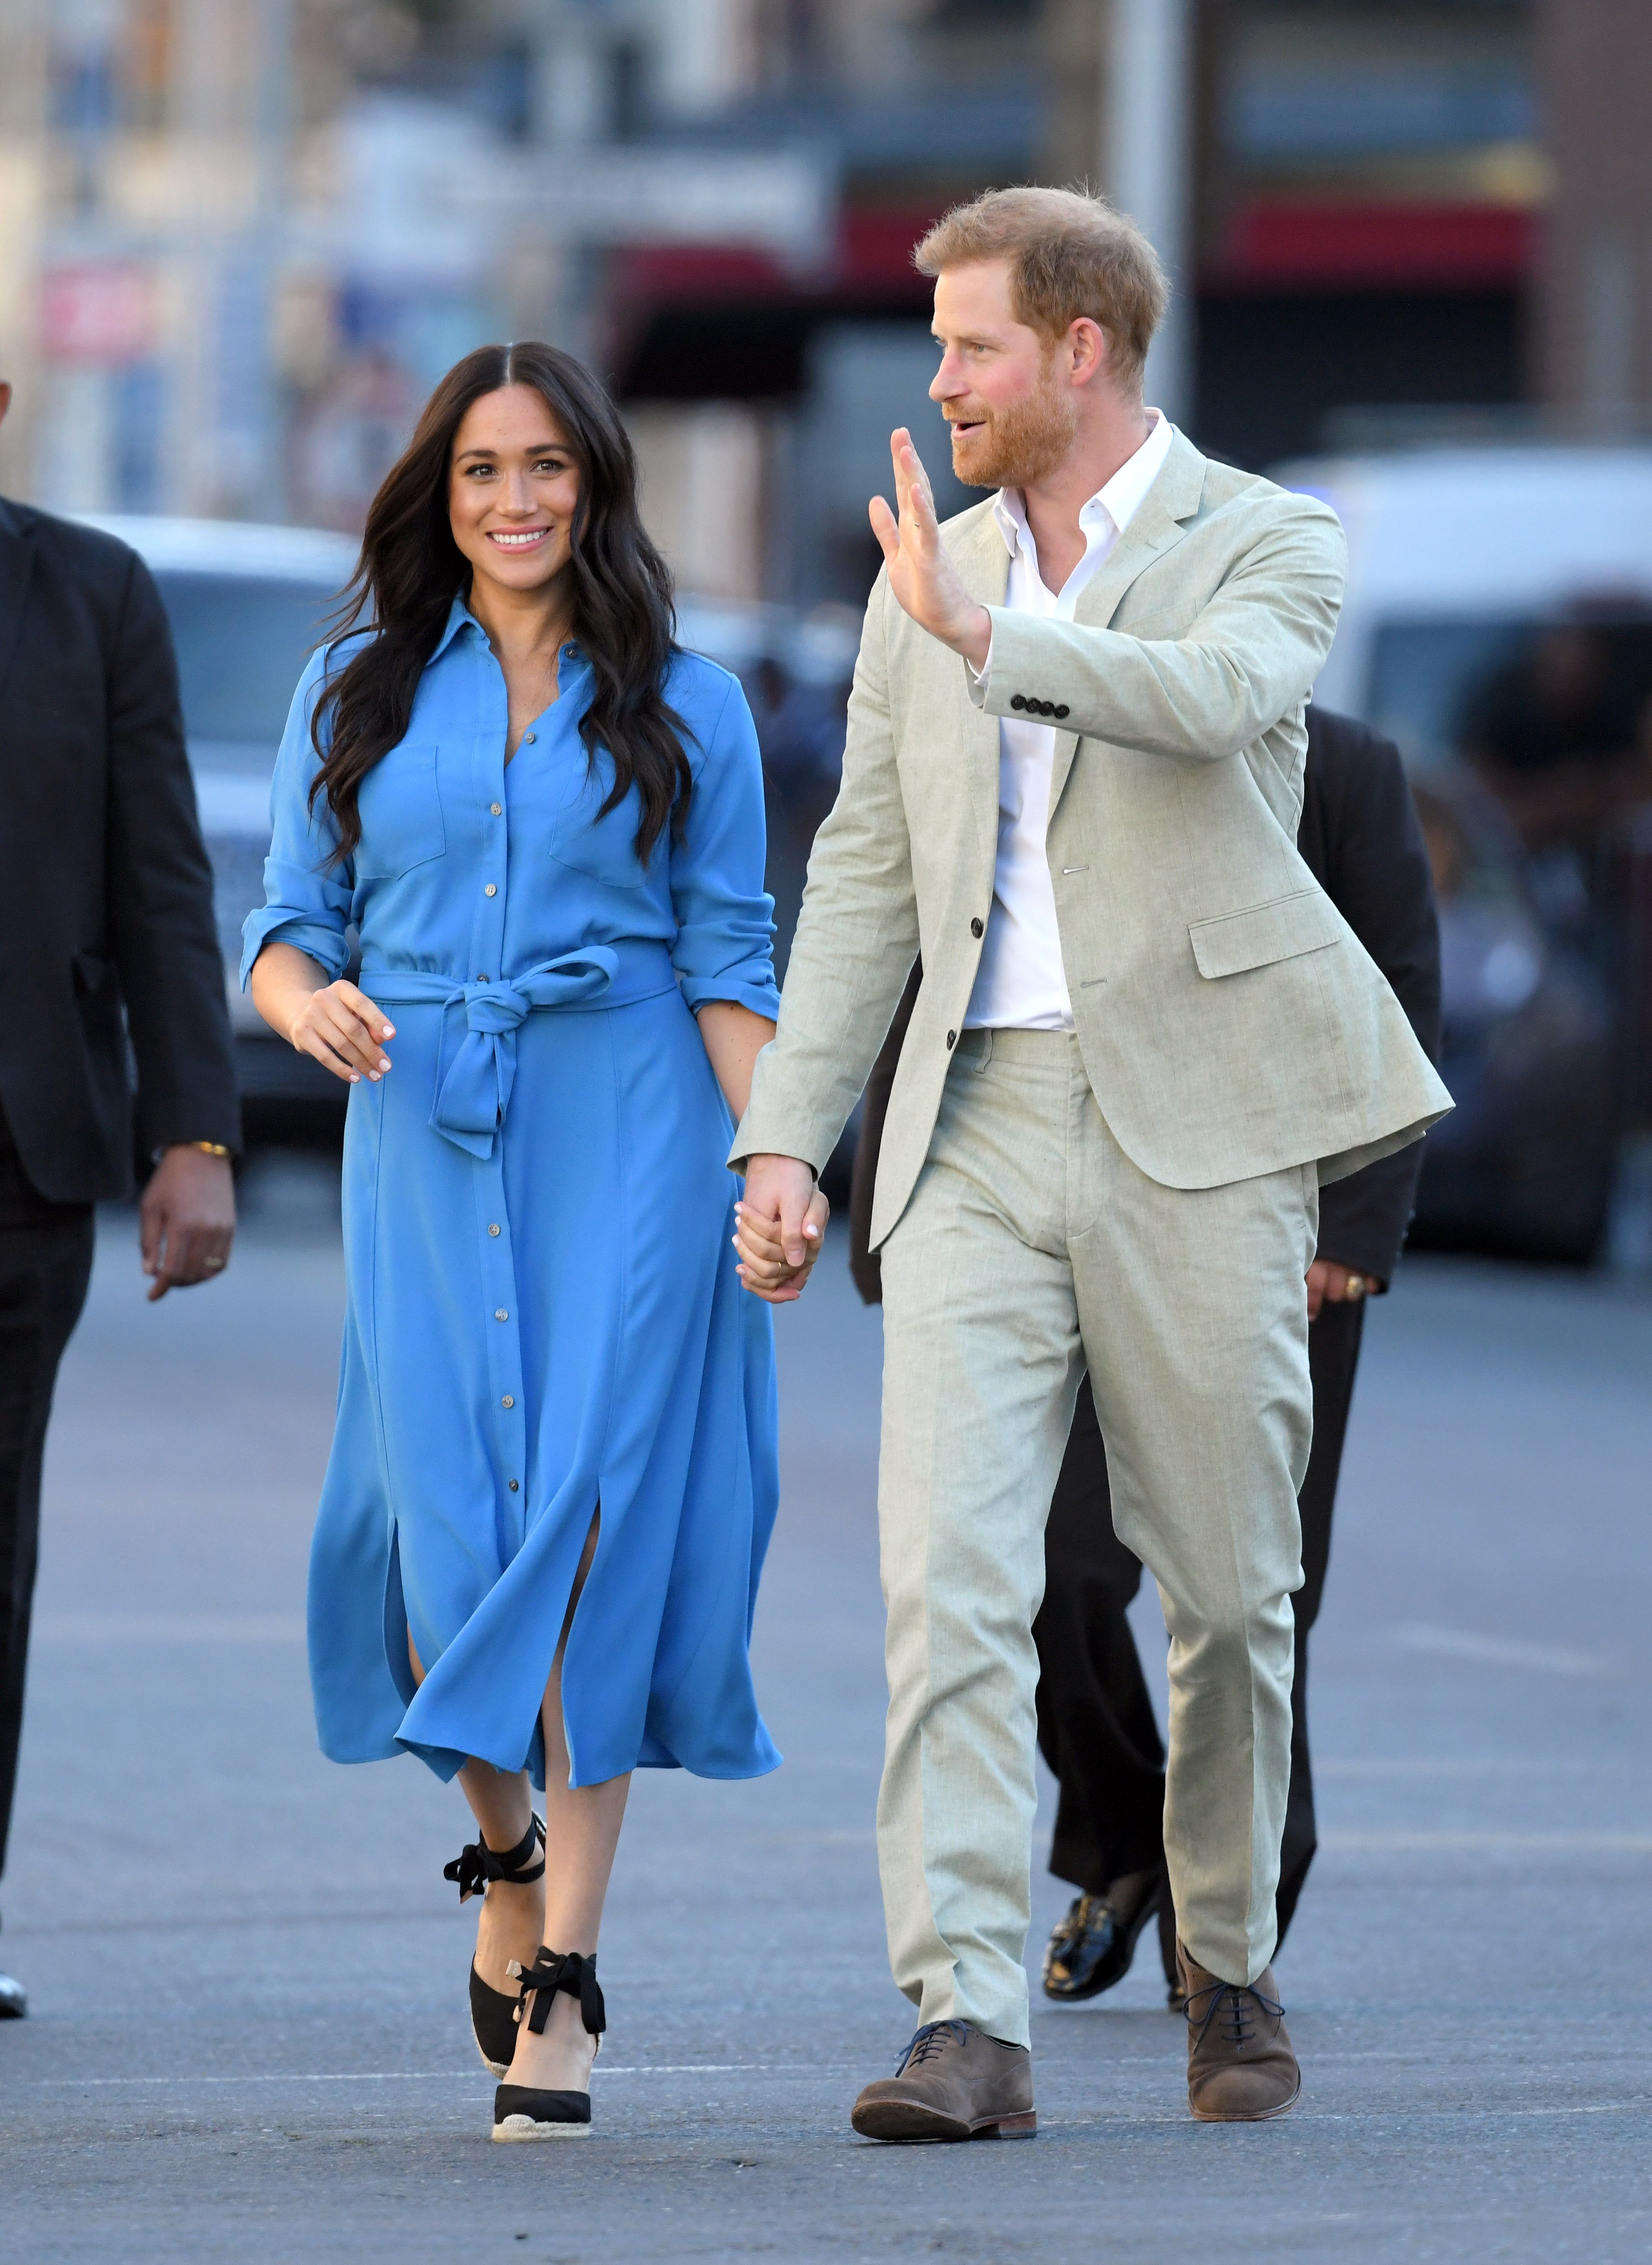 Meghan, Duchess of Sussex and Prince Harry, Duke of Sussex visit the Homecoming Centre during their royal tour of South Africa on September 23, 2019 in Cape Town, South Africa | Source: Getty Images